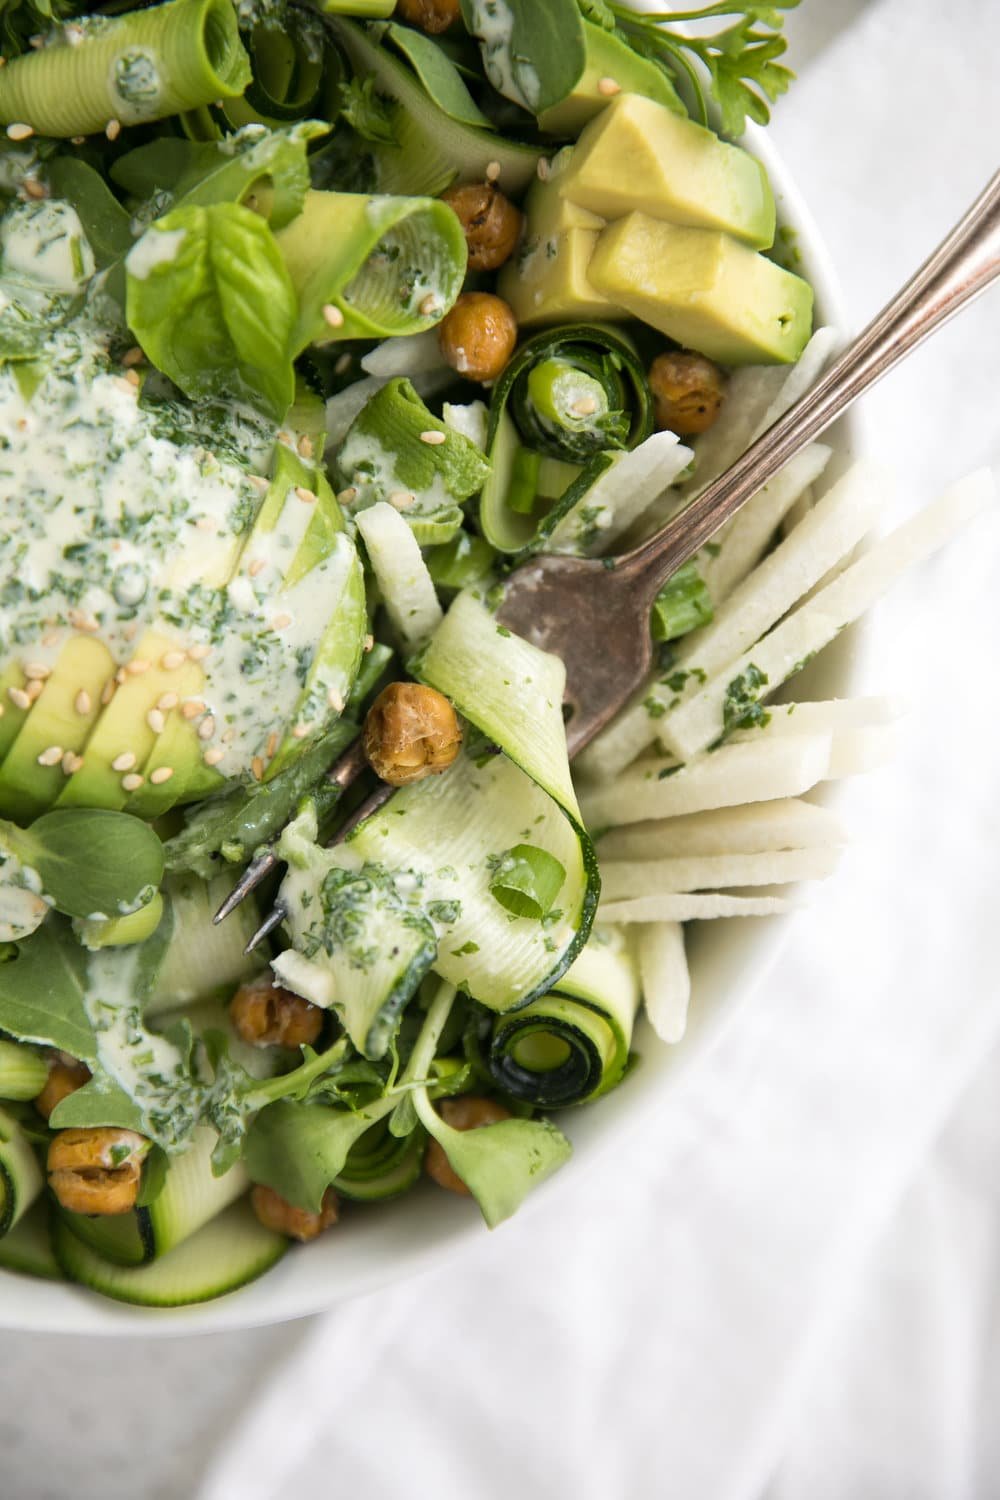 forked zucchini avocado salad with garlic herb dressing and roasted chickpeas